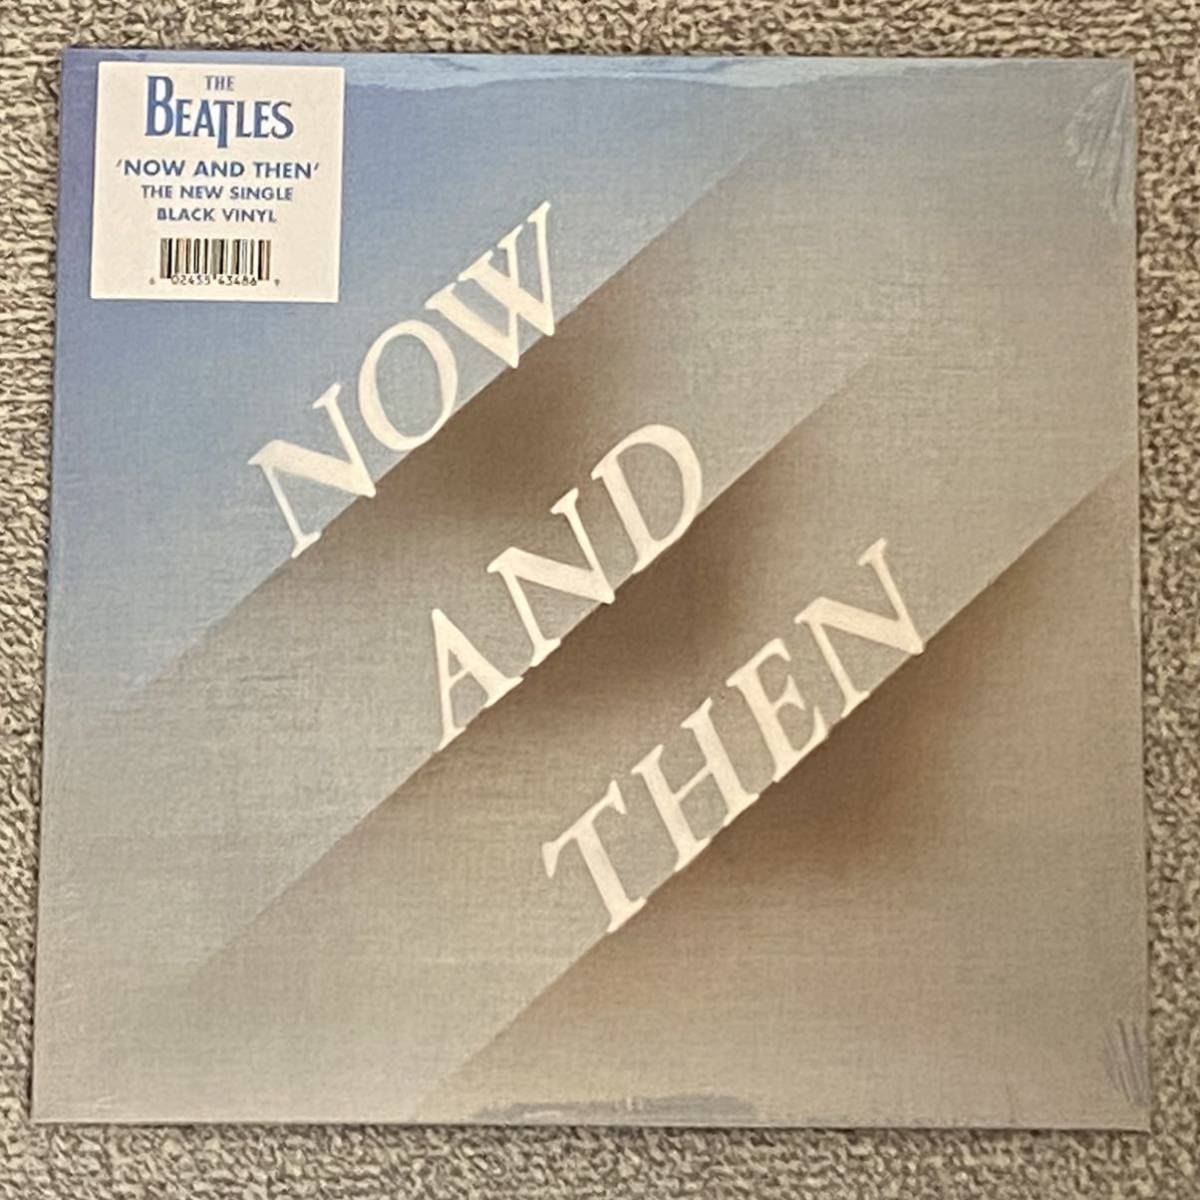 ★★THE LAST BEATLES SONG NOW AND THEN★SPOTIFY FANS FIRST 10inch EDITION★10インチ・ブラック・ヴァージョン 輸入盤 新品未開封★★_画像1